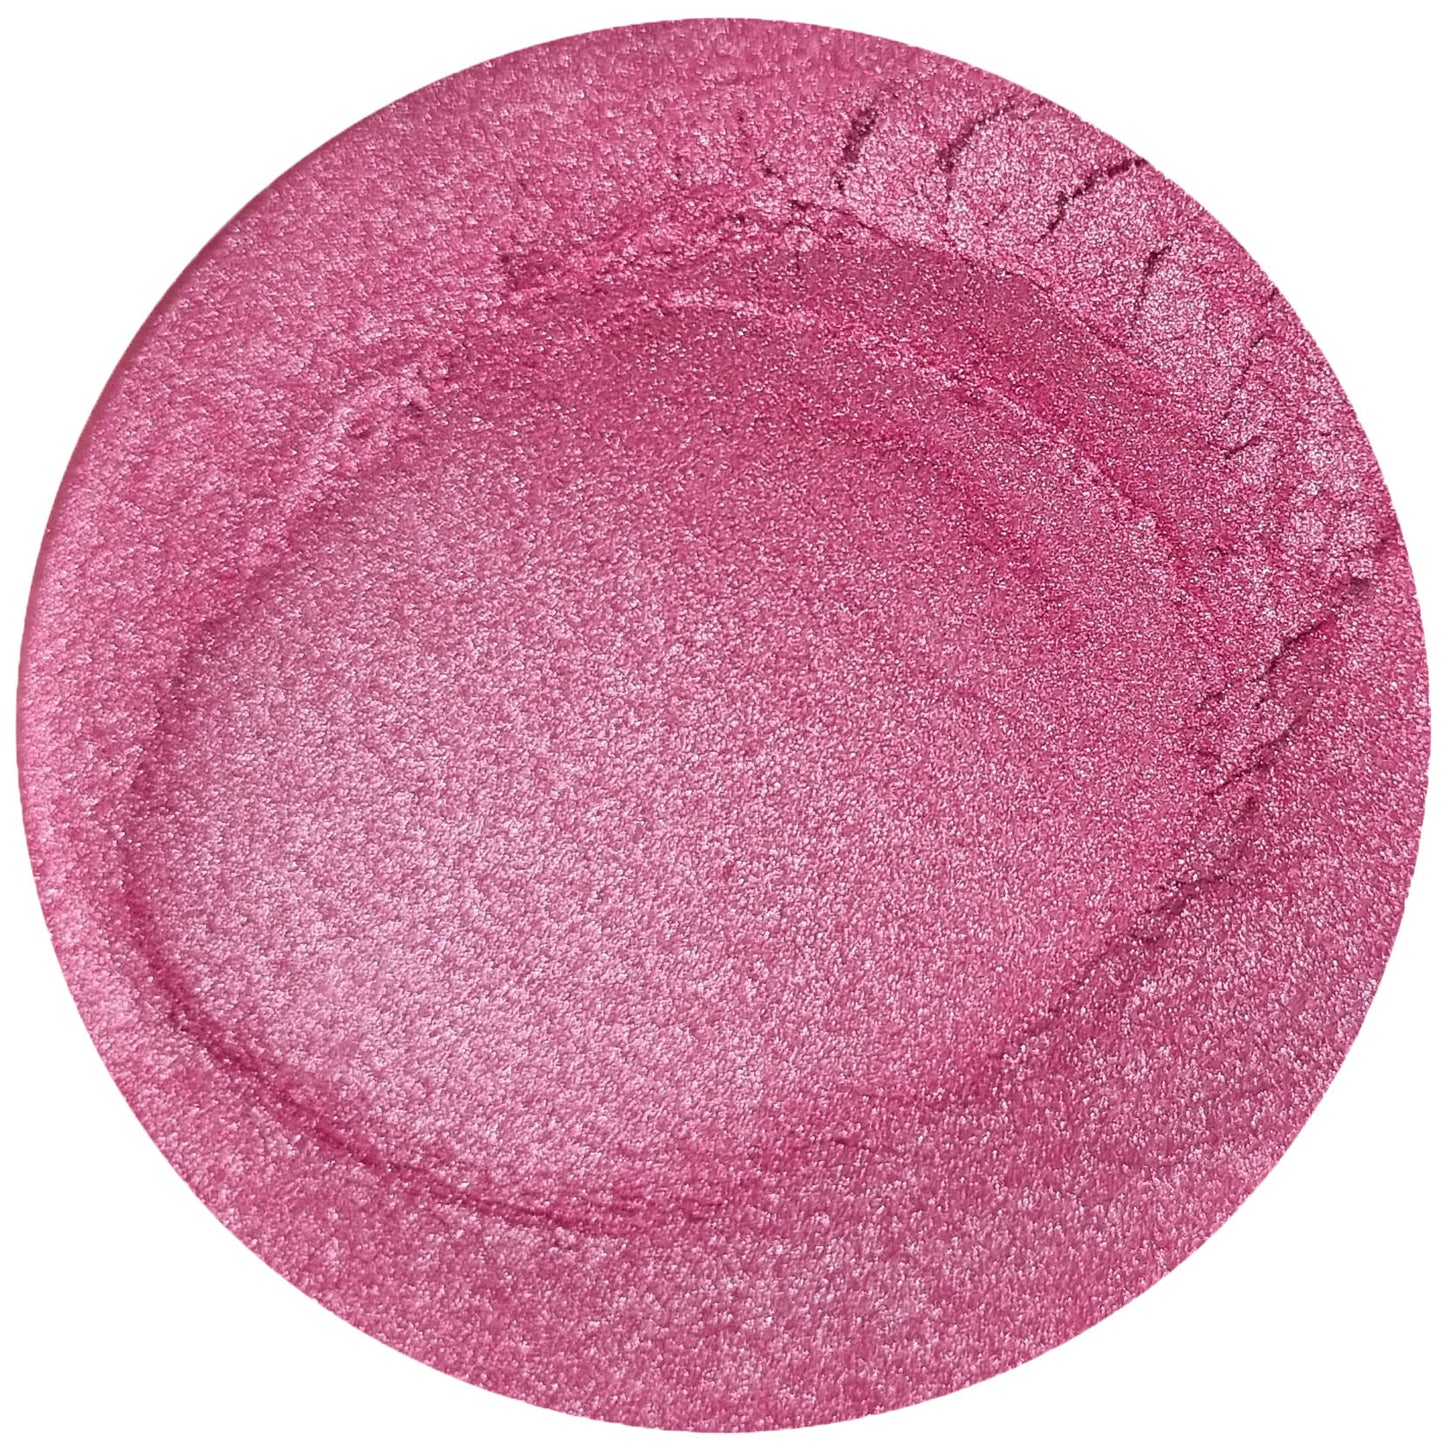 Frosted Rose Petal | Pearlescent Cosmetic Mica | Truly Personal Ltd | Wax Melt Glitter